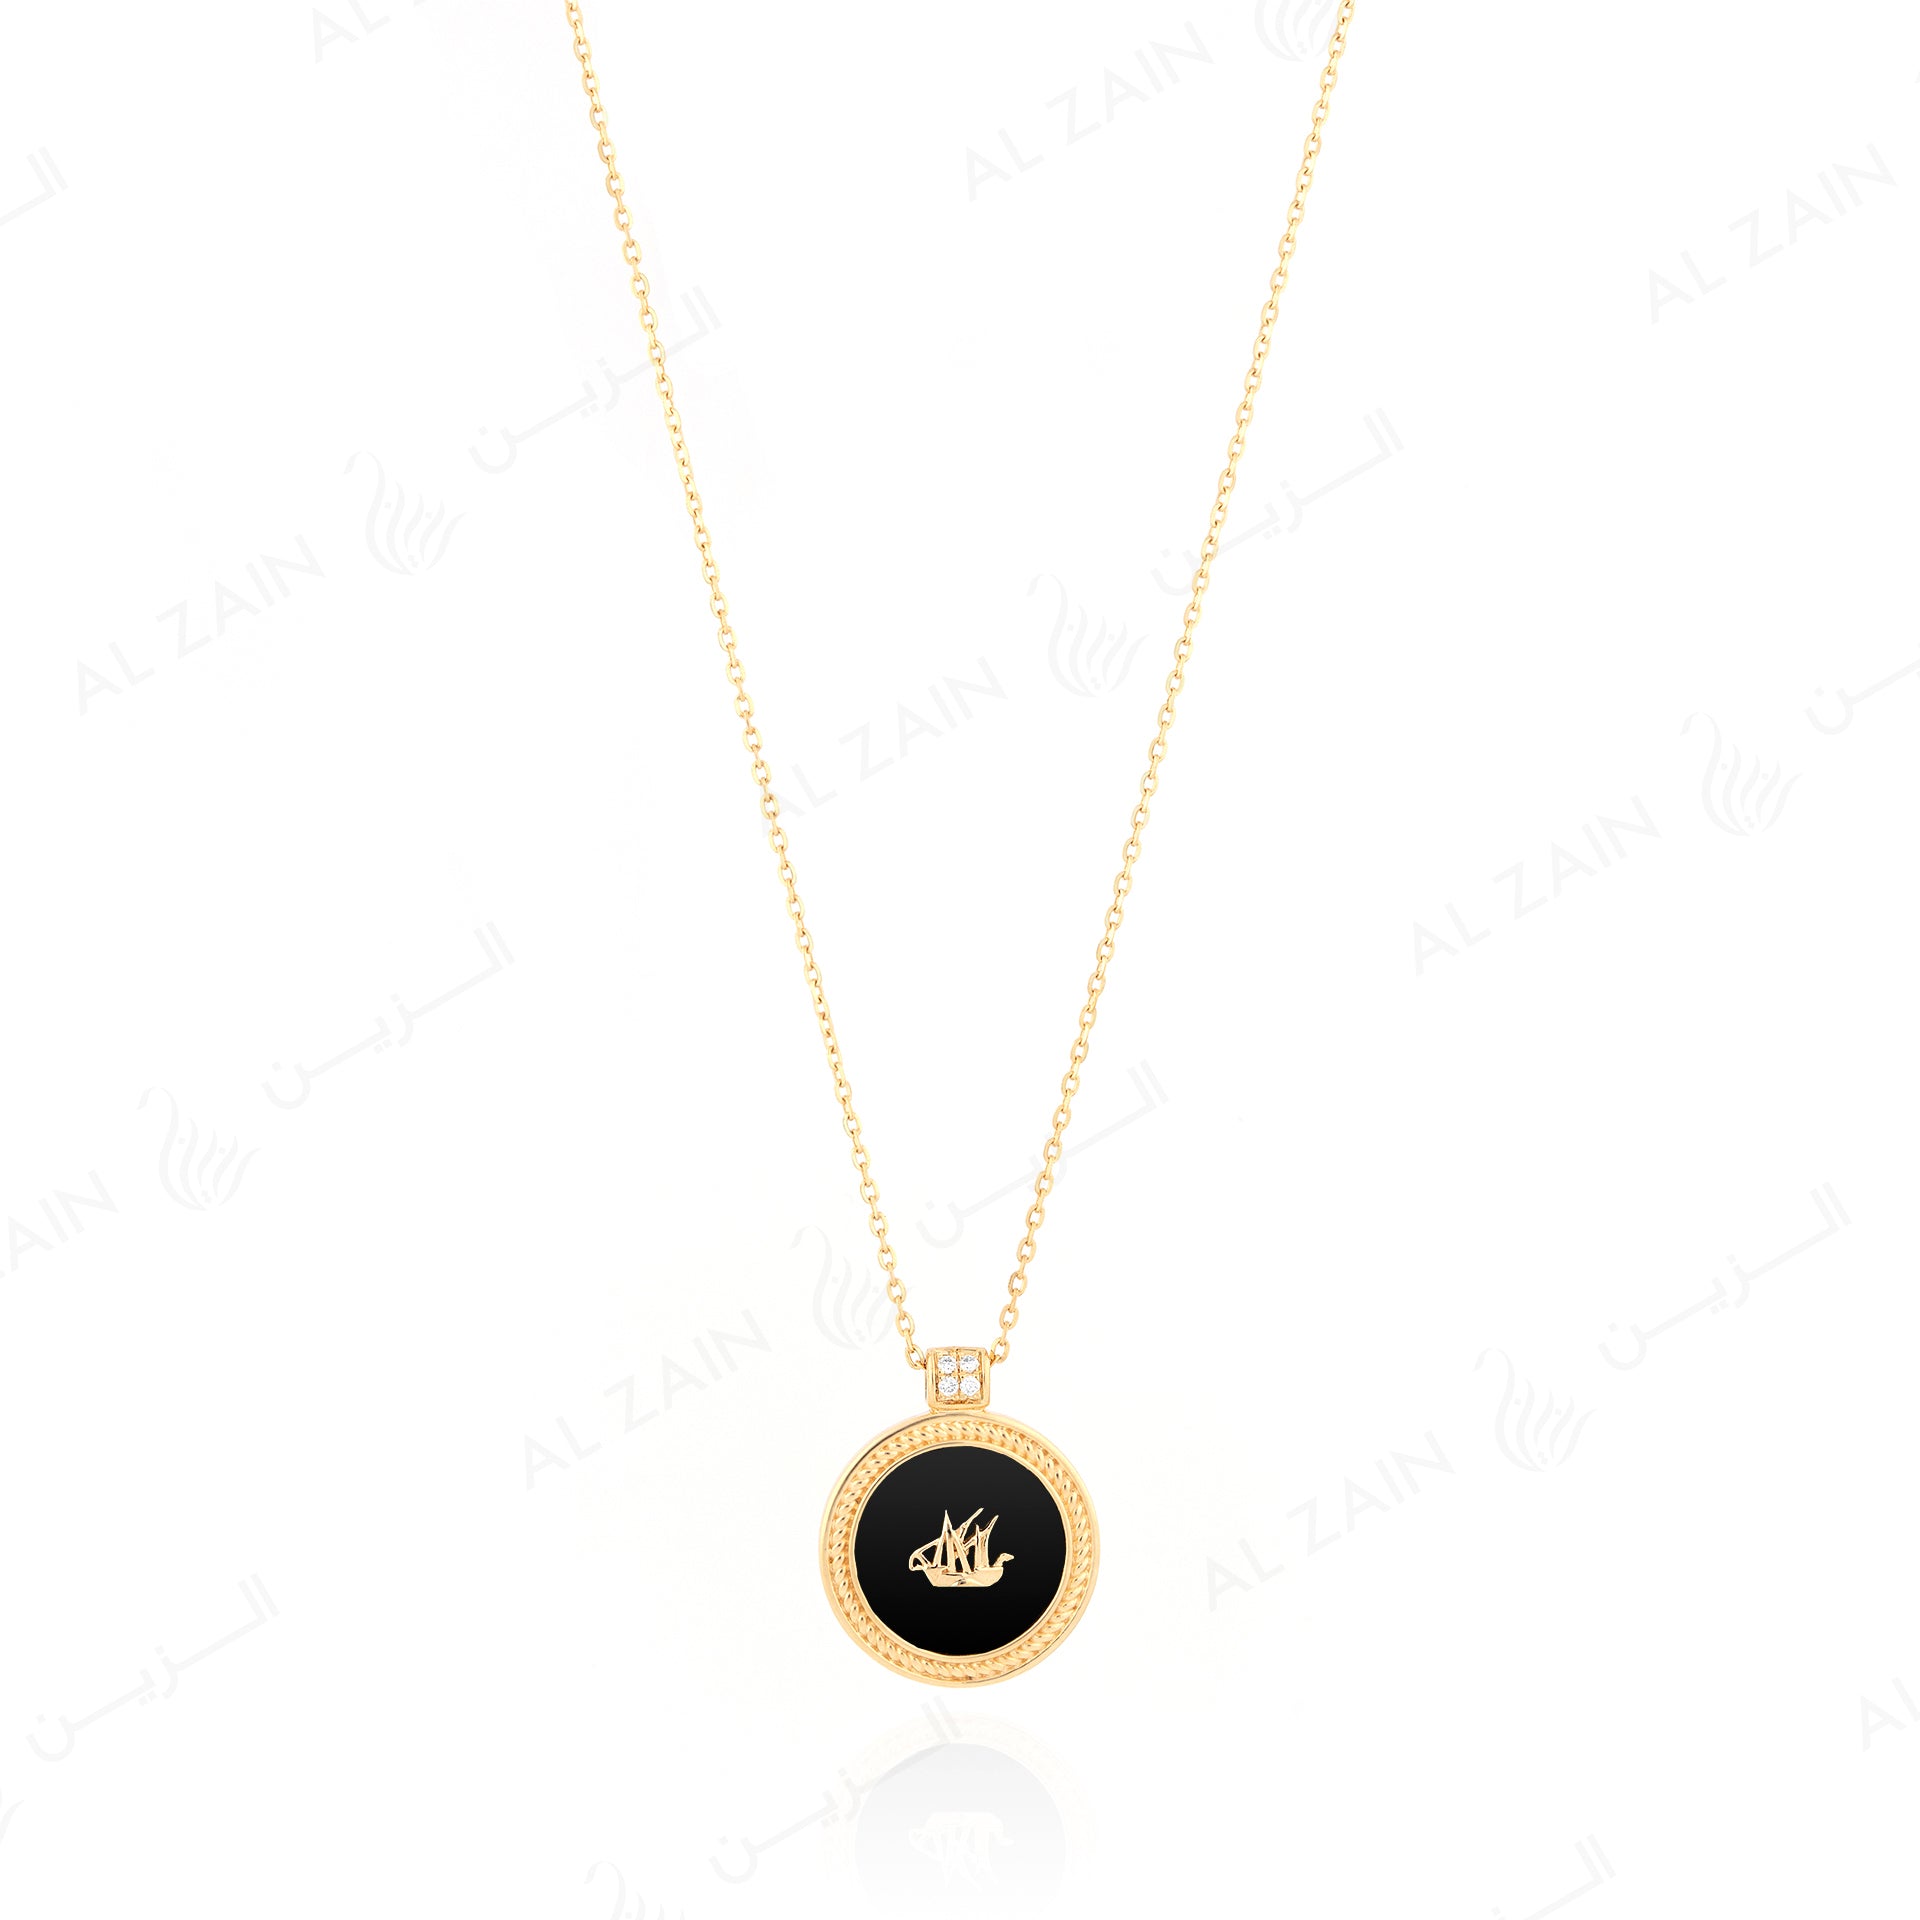 Kuwait Necklace in Yellow Gold with Onyx and diamonds